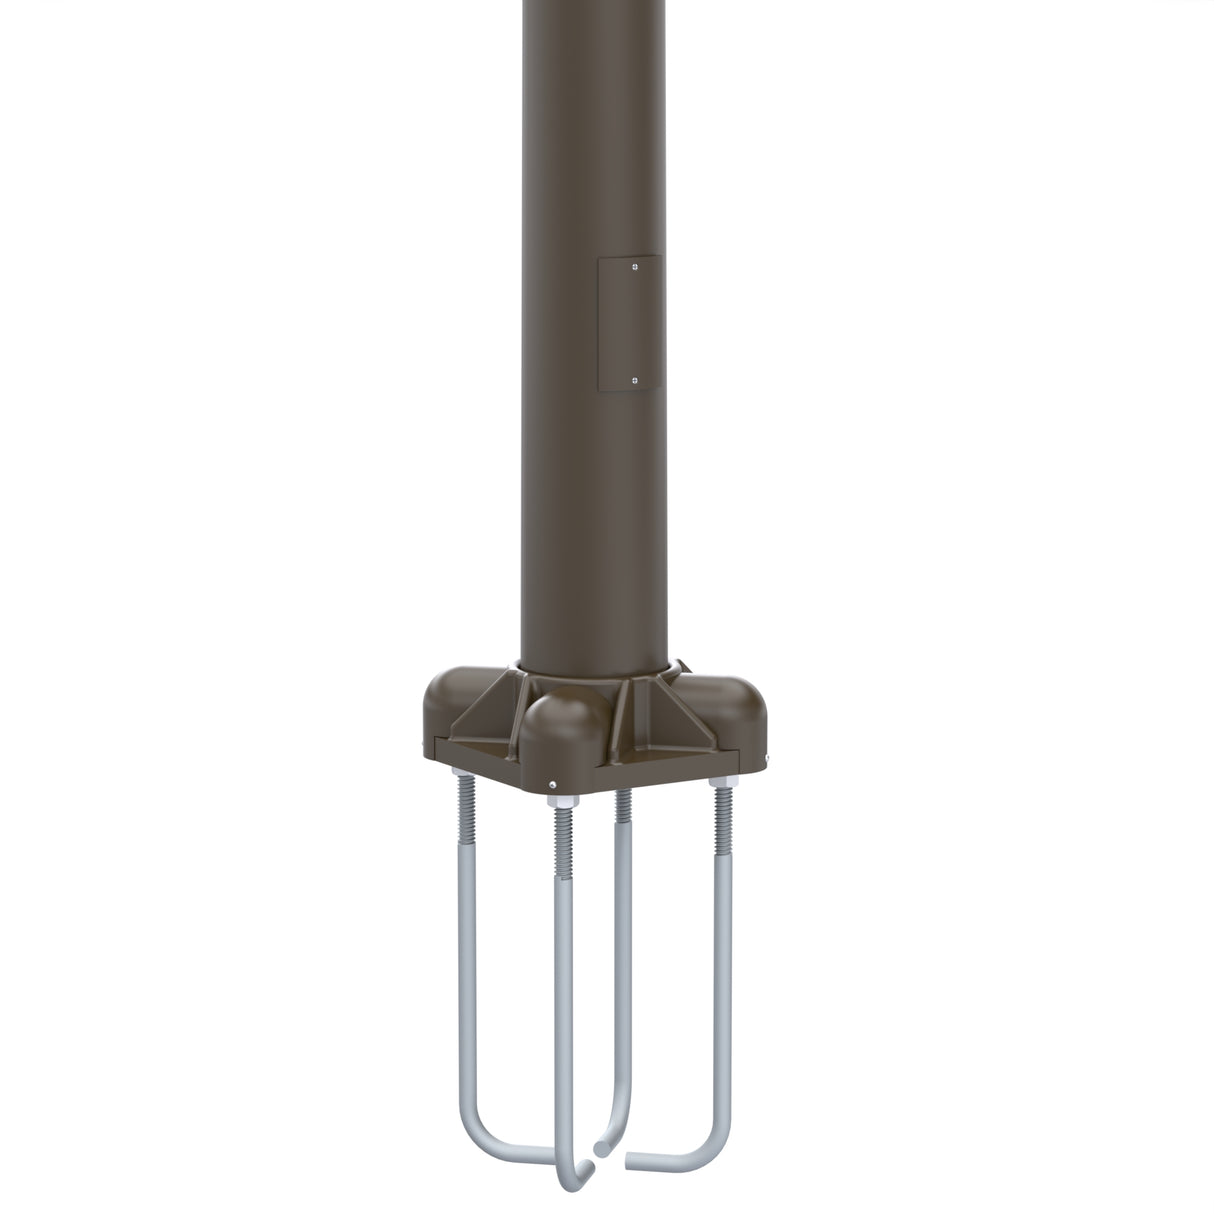 39' Tall x 9.0" Base OD x 4.5" Top OD x 0.188" Thick, Round Tapered Aluminum, Anchor Base Light Pole